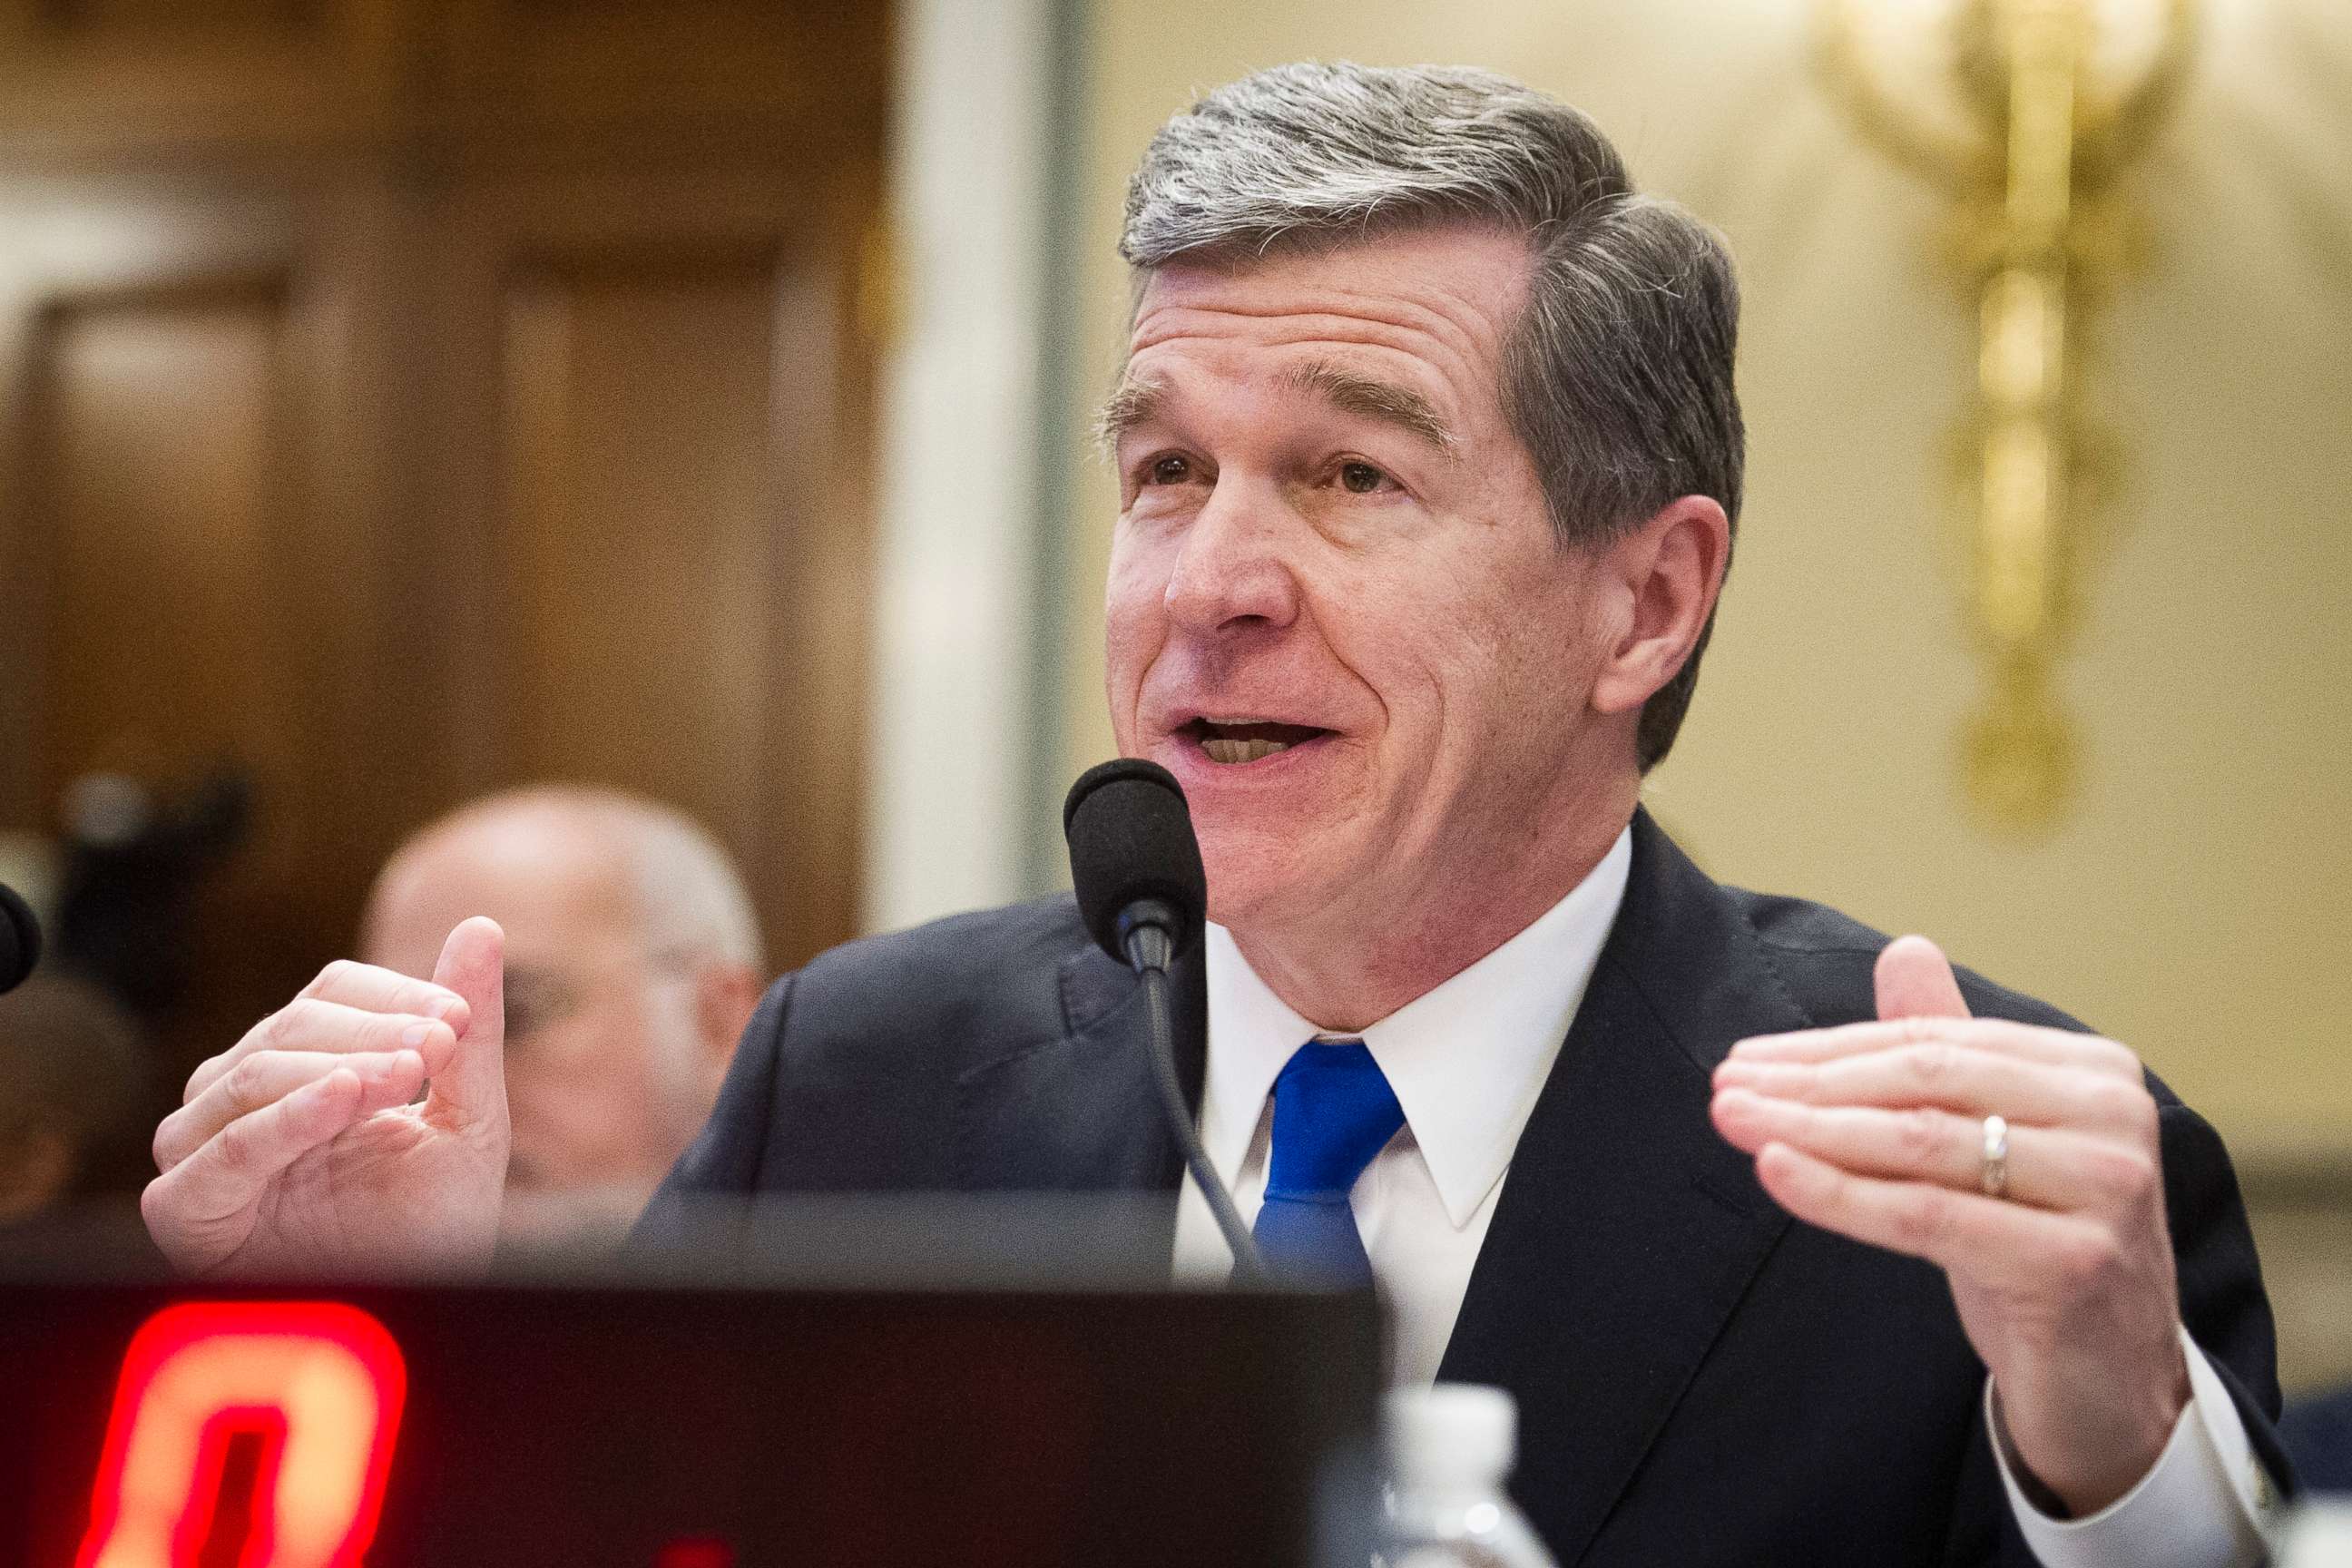 PHOTO: North Carolina Gov. Roy Cooper testifies before the House Natural Resources Committee hearing on climate change on Capitol Hill in Washington, Feb. 6, 2019.